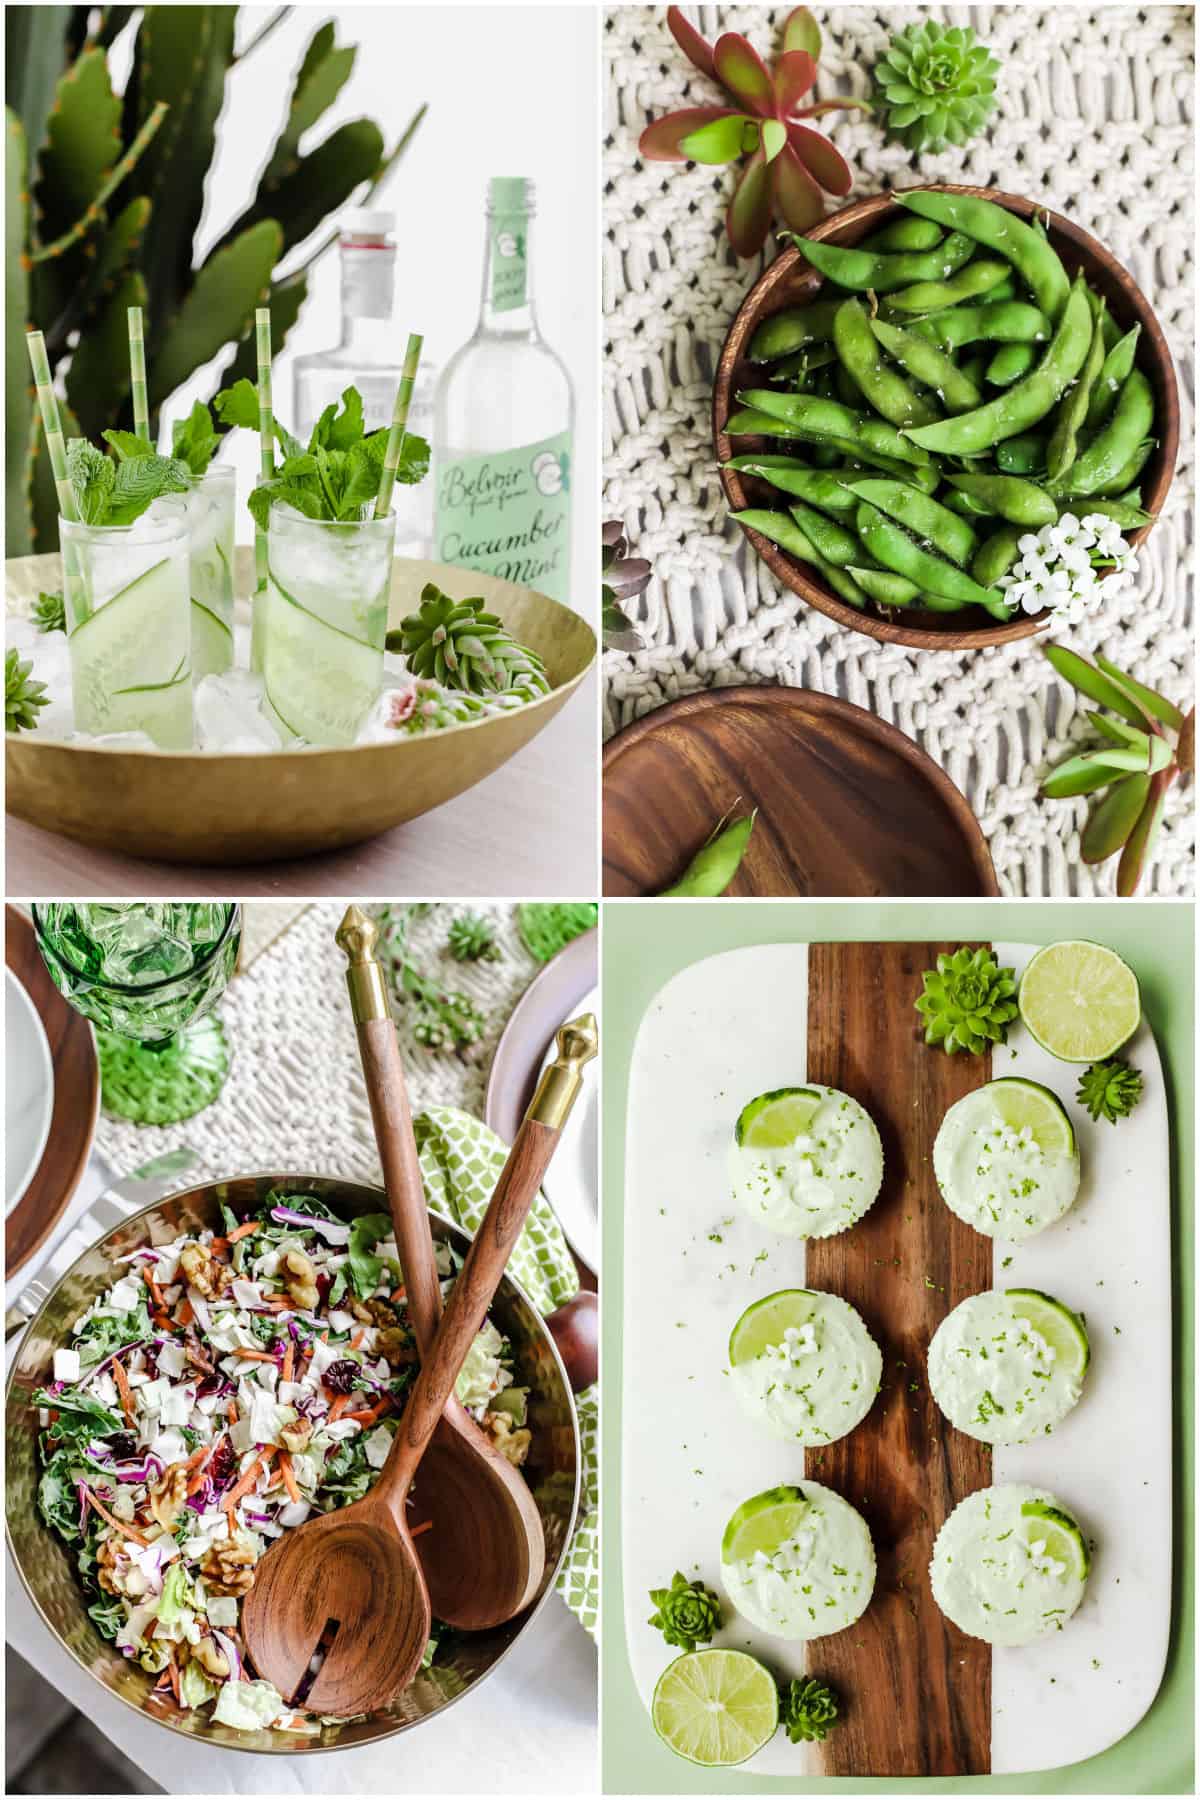 photo collage with 4 images of a cocktail, edamame pods, salad, and green cupcakes.